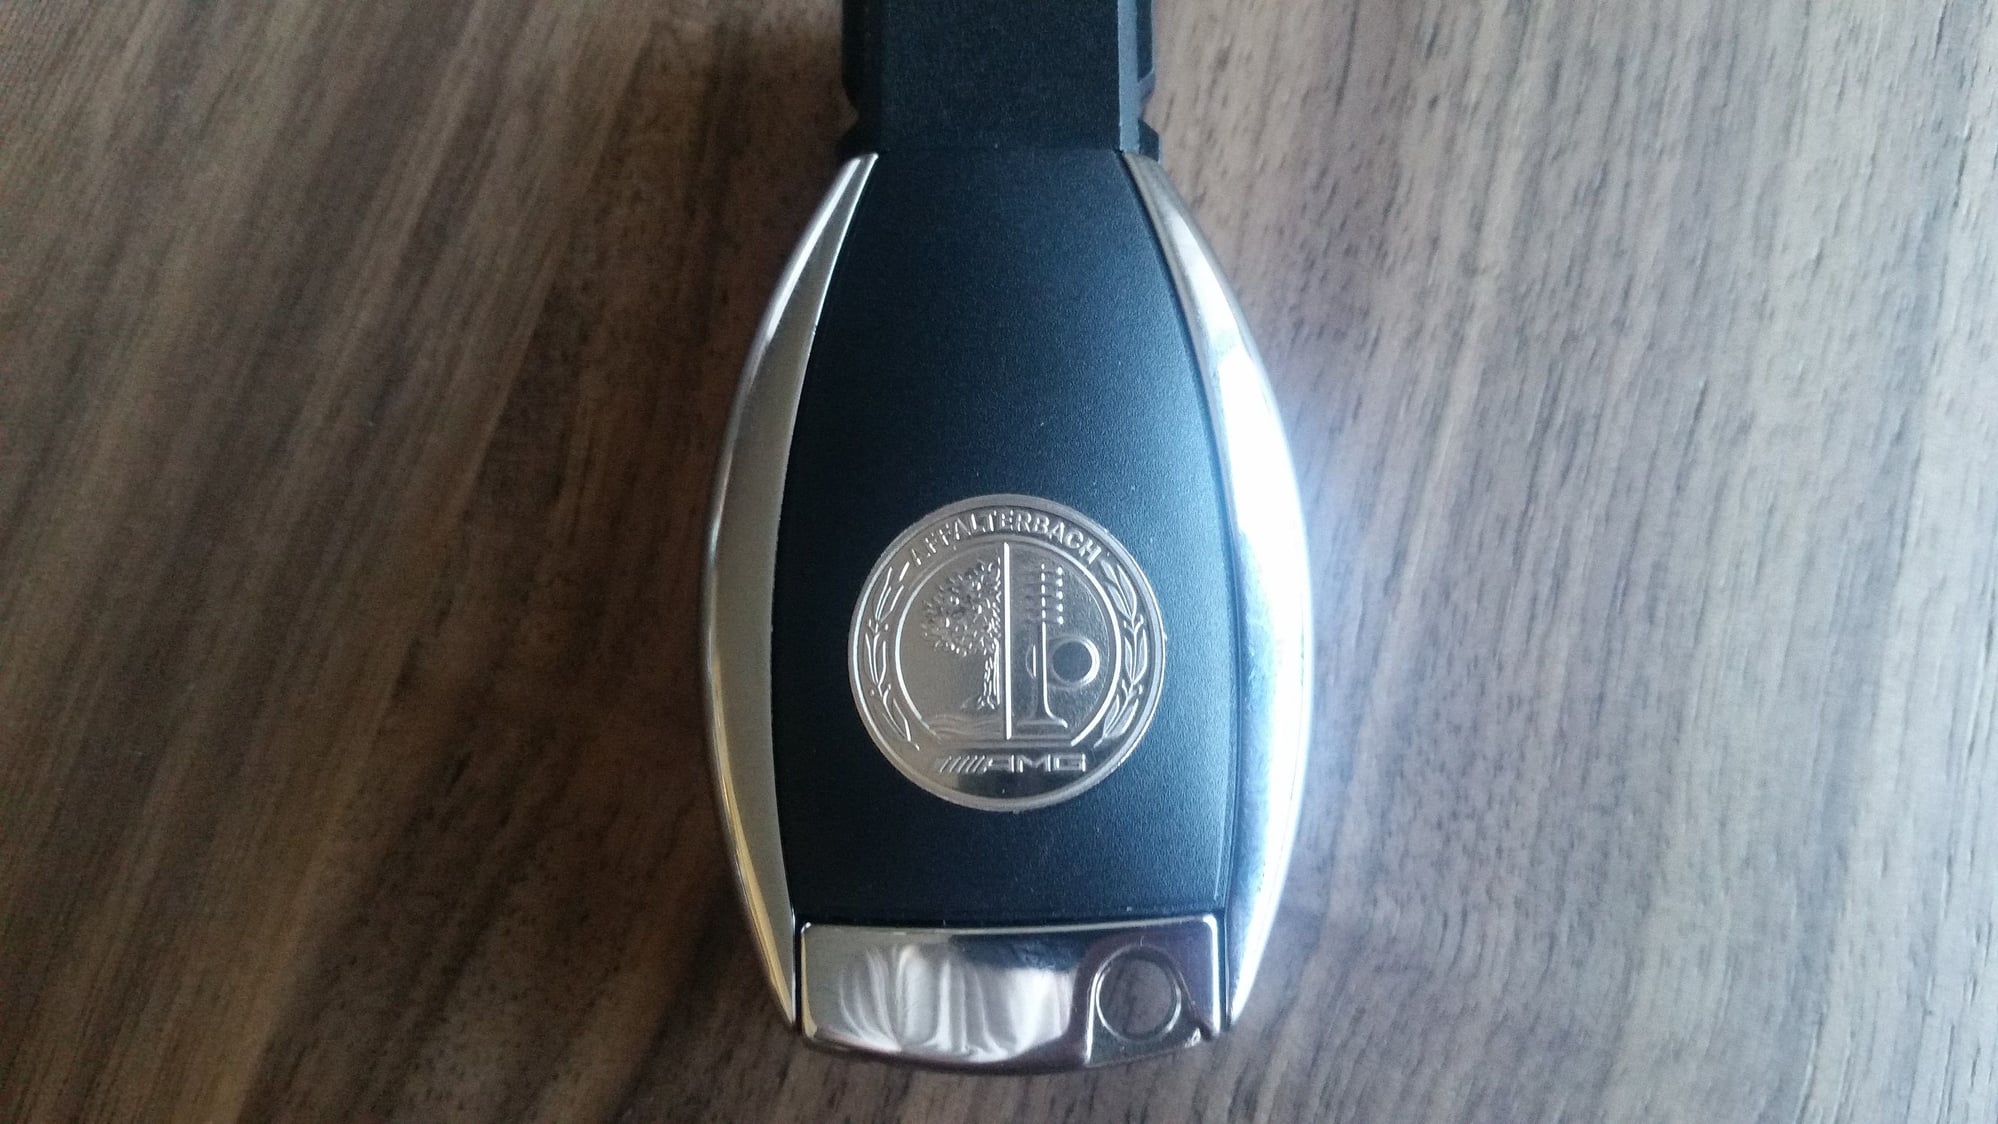 Accessories - OEM Mercedes AMG Affalterbach key back (not key) - Used - 2015 to 2018 Mercedes-Benz C63 AMG - Aurora, CO 80016, United States